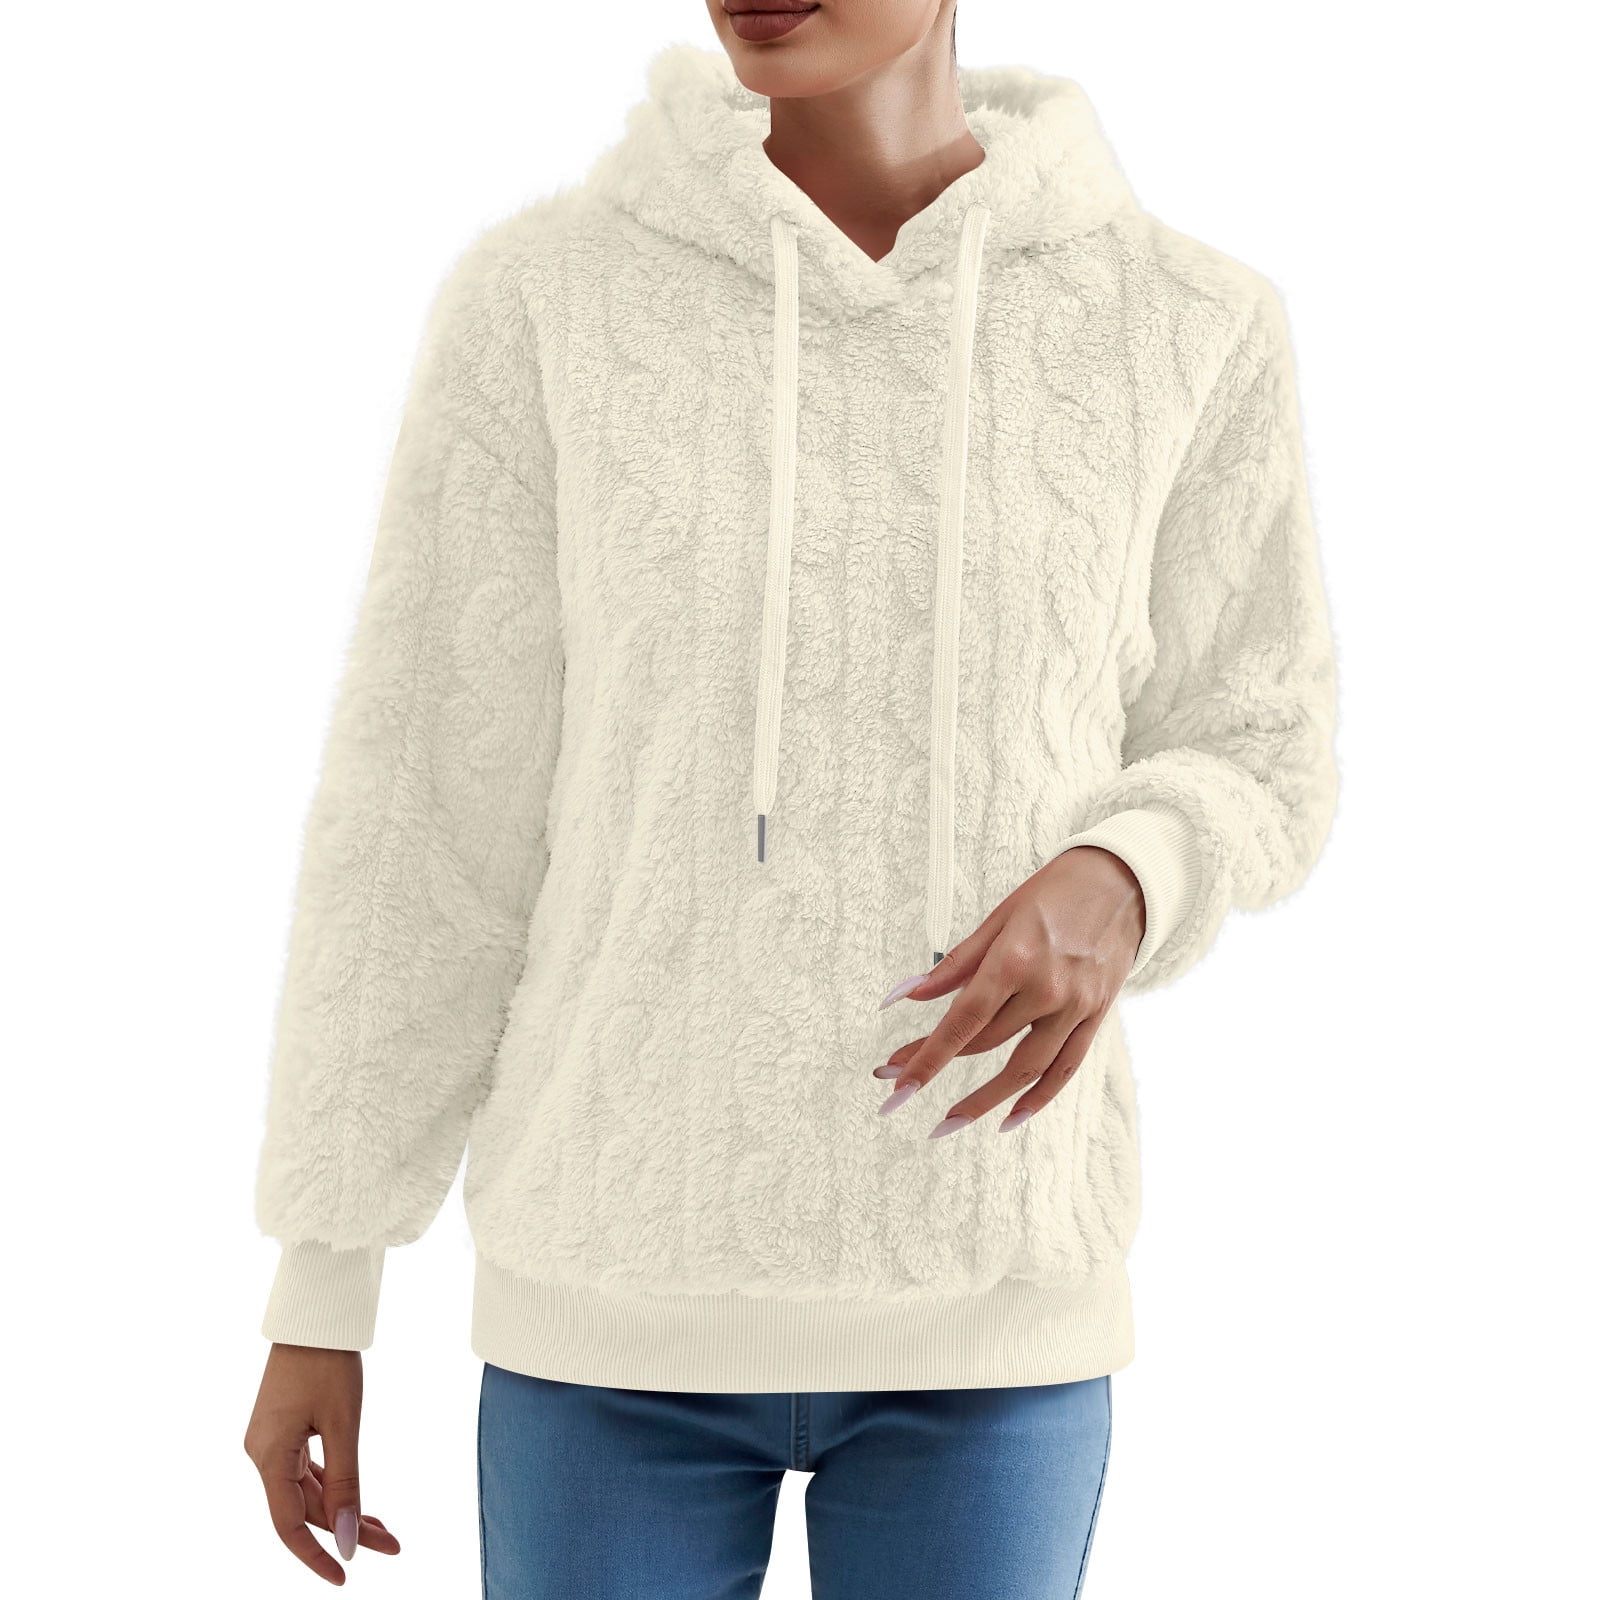 Cable Knit Fuzzy Hood Sweater Quarter Zip Pullover Sweatshirt Plush Casual  Hoodie Warm Long Sleeve Tops Pockets (Small, Beige 01) 